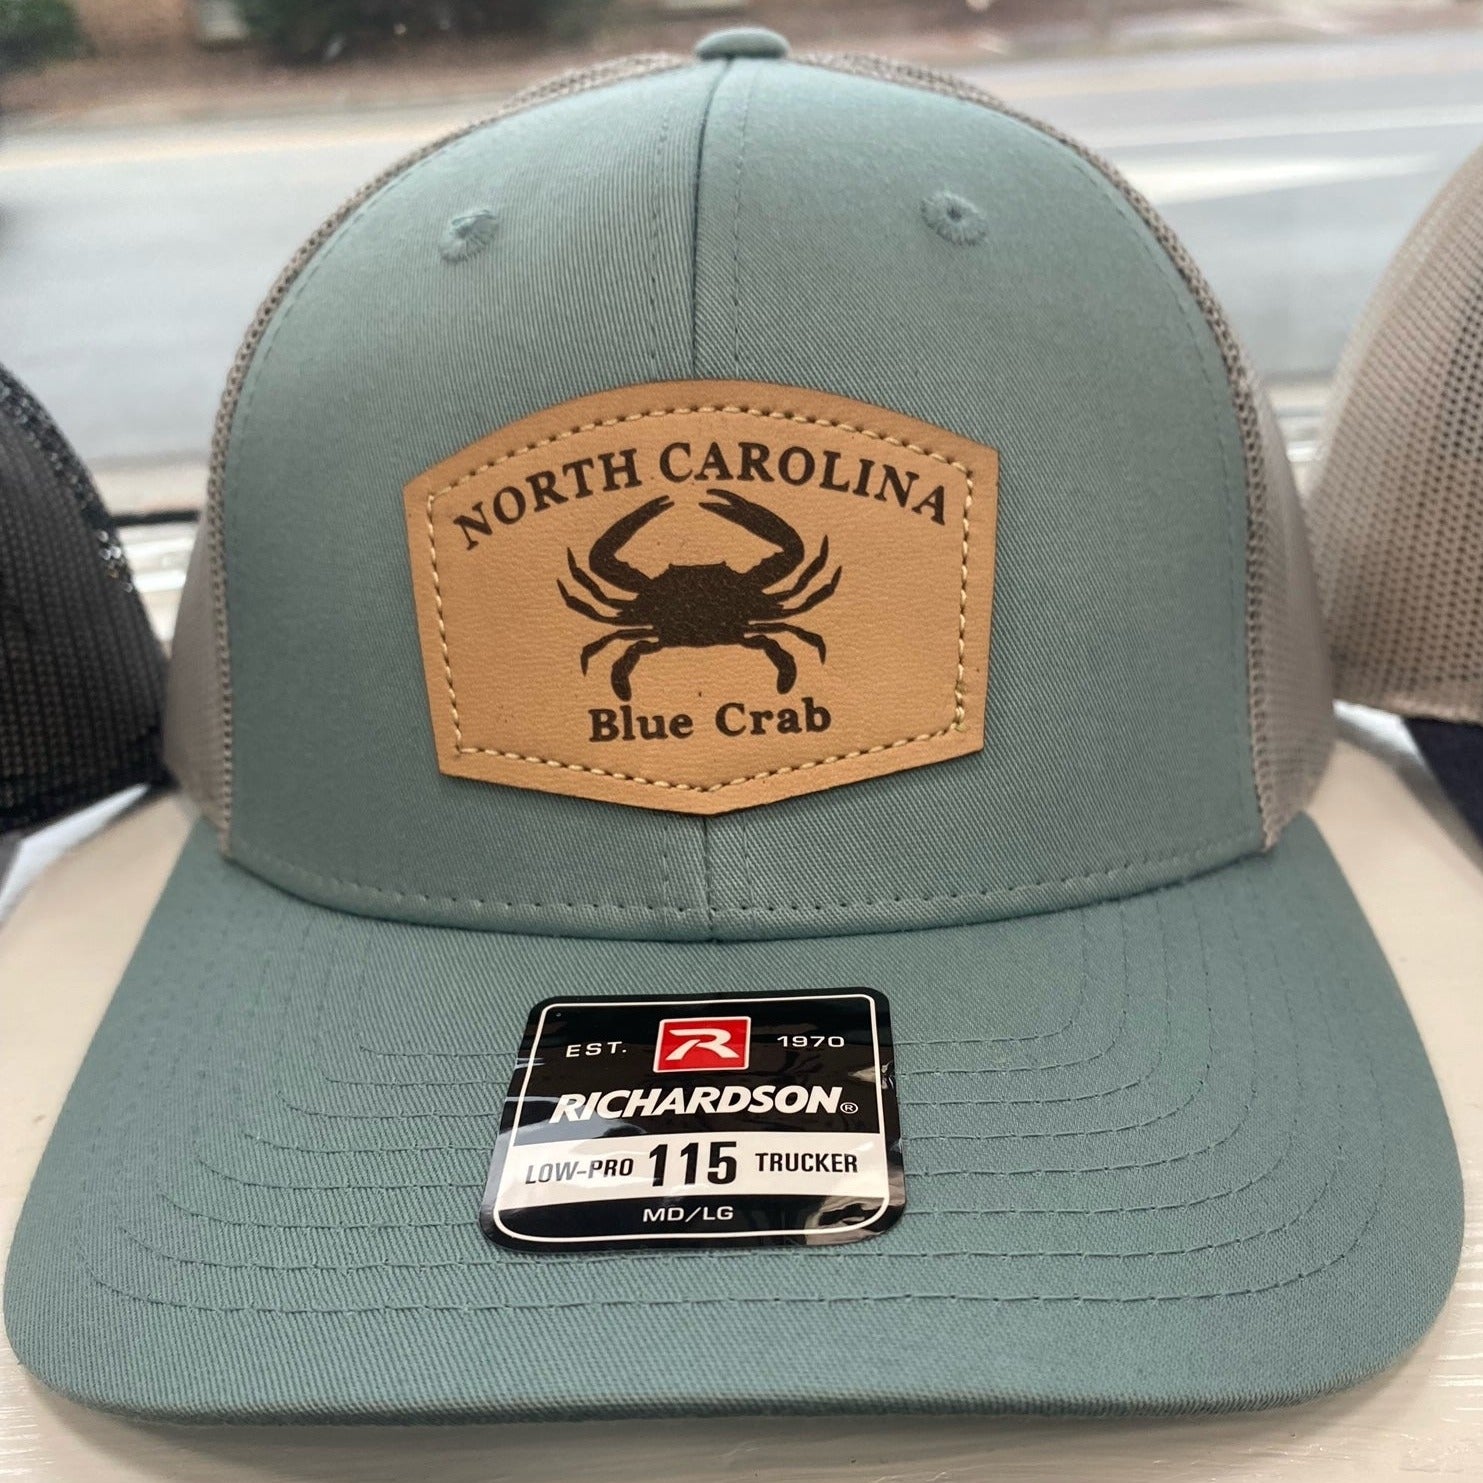 Blue and grey hat with leather emblem that has a blue crab and North Carolina written on it